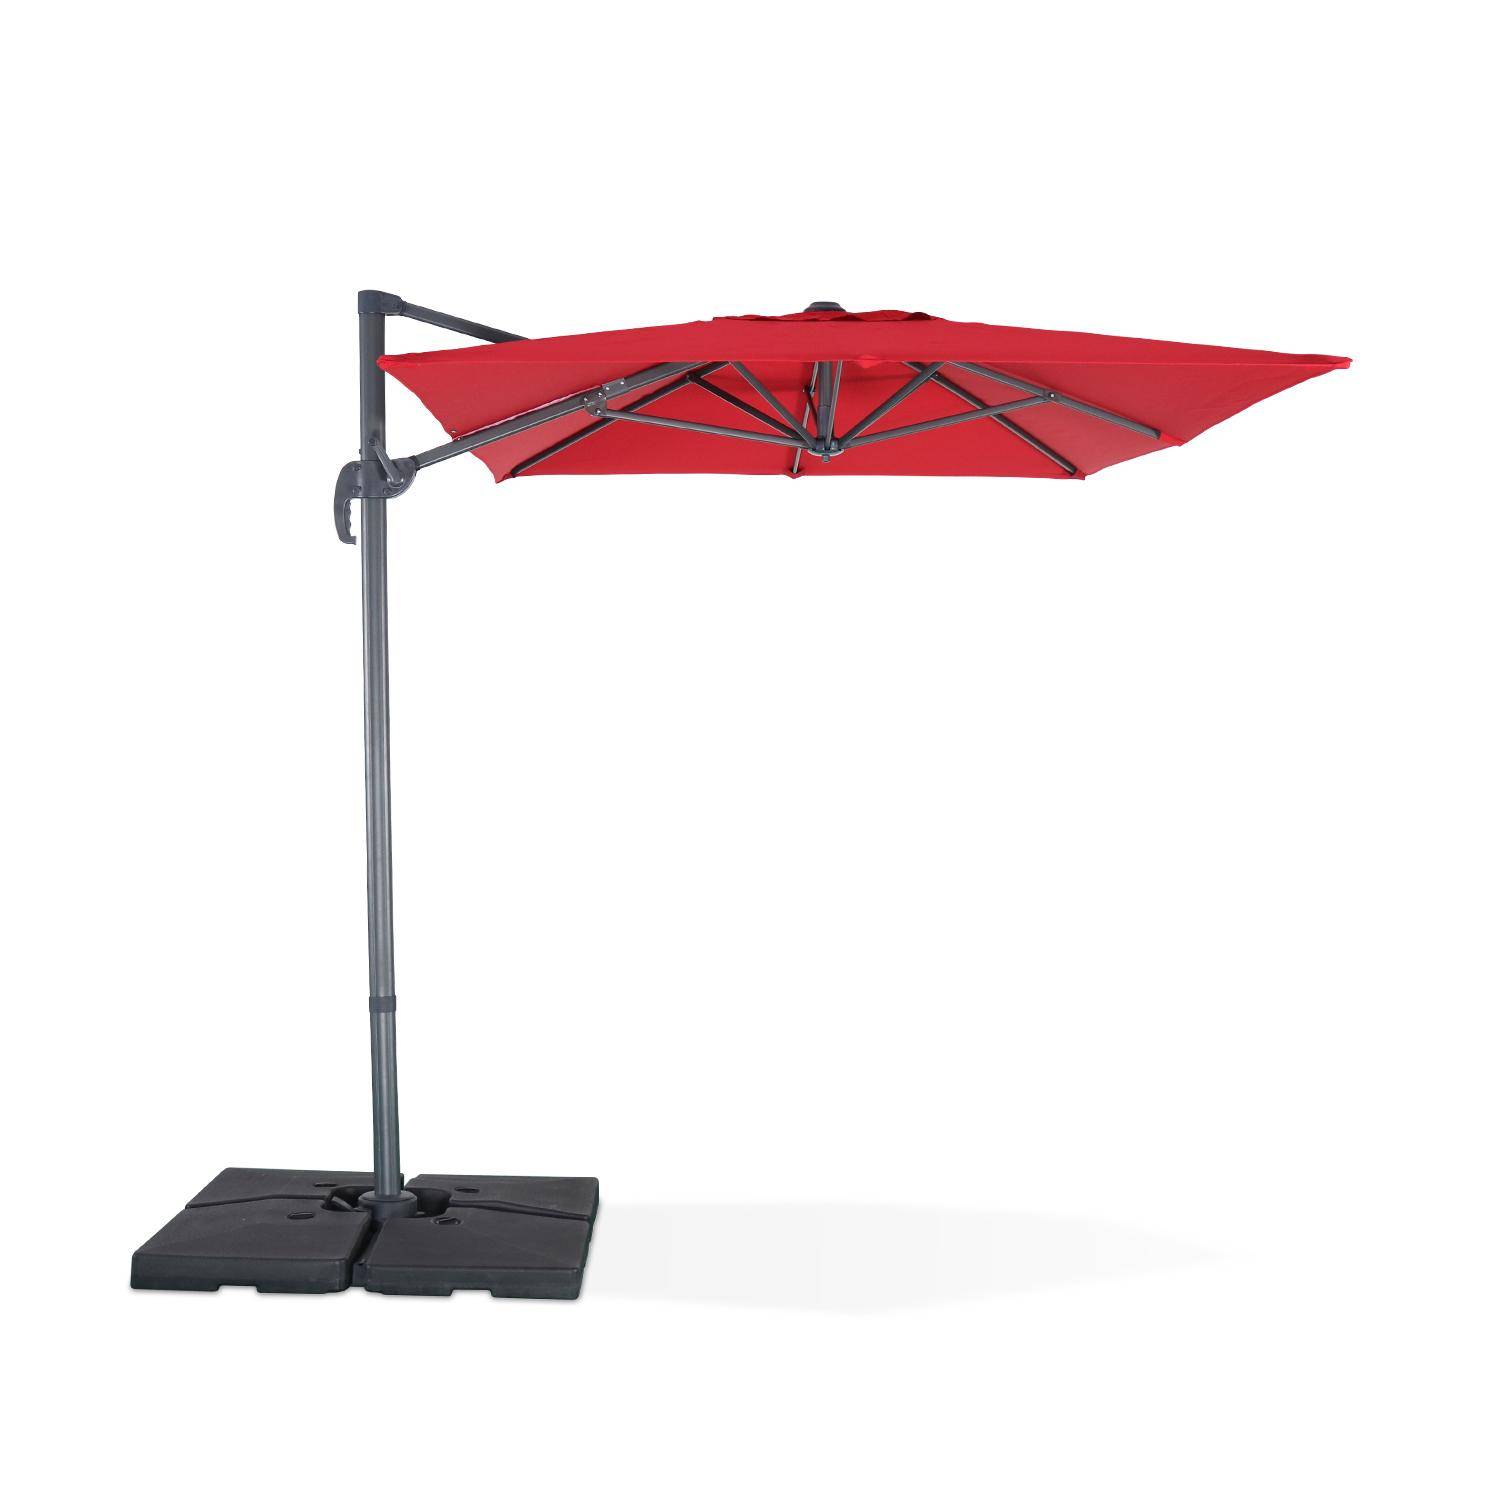 2x3m rectangular cantilever paraso - parasol can be tilted, folded and rotated 360 degreesl - Antibes - Red,sweeek,Photo1